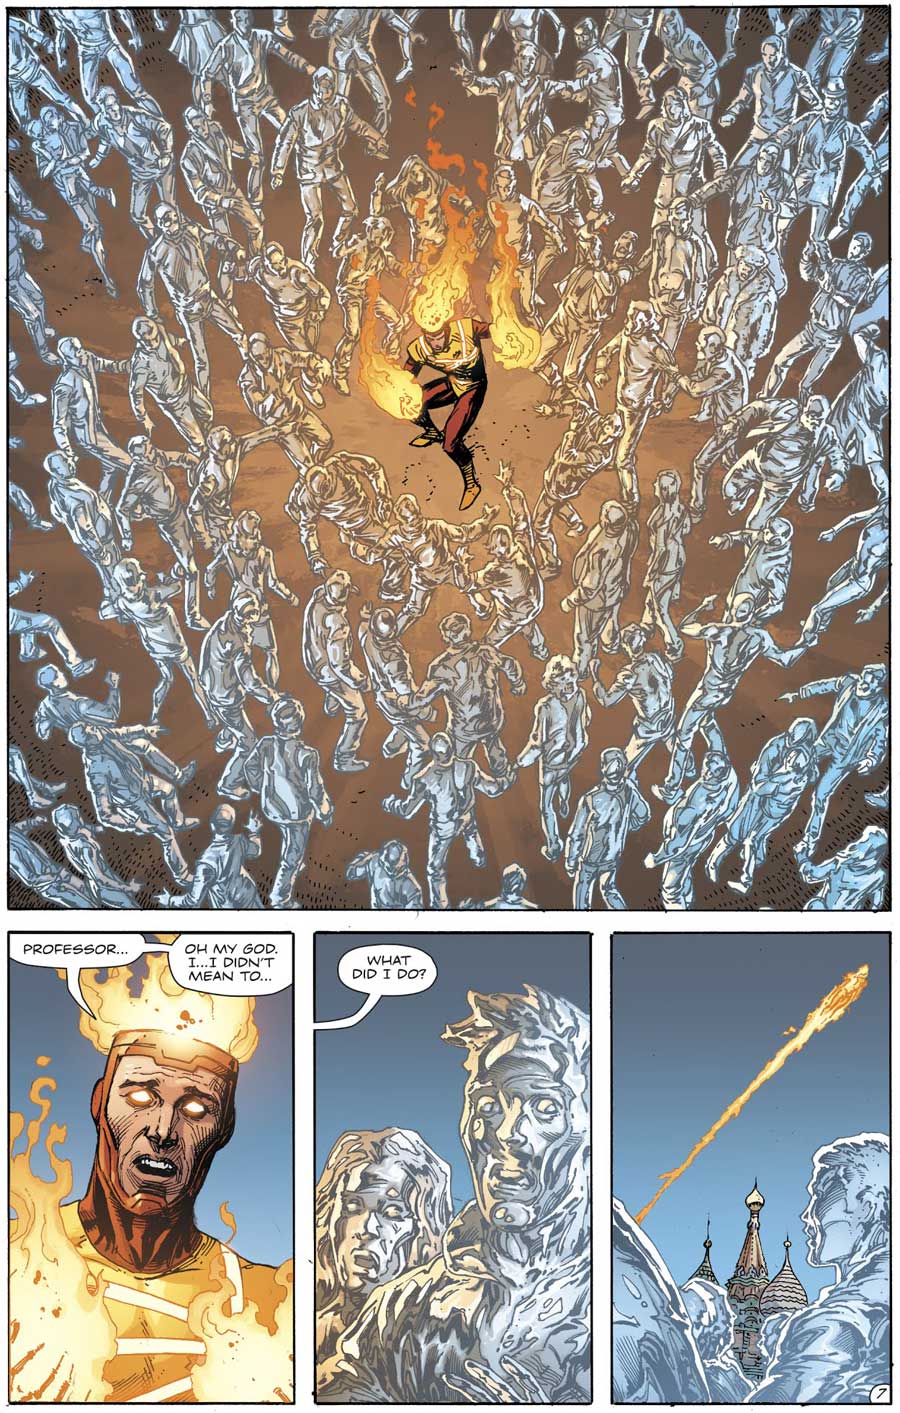 Doomsday Clock #8 by Geoff Johns and Gary Frank featuring Firestorm